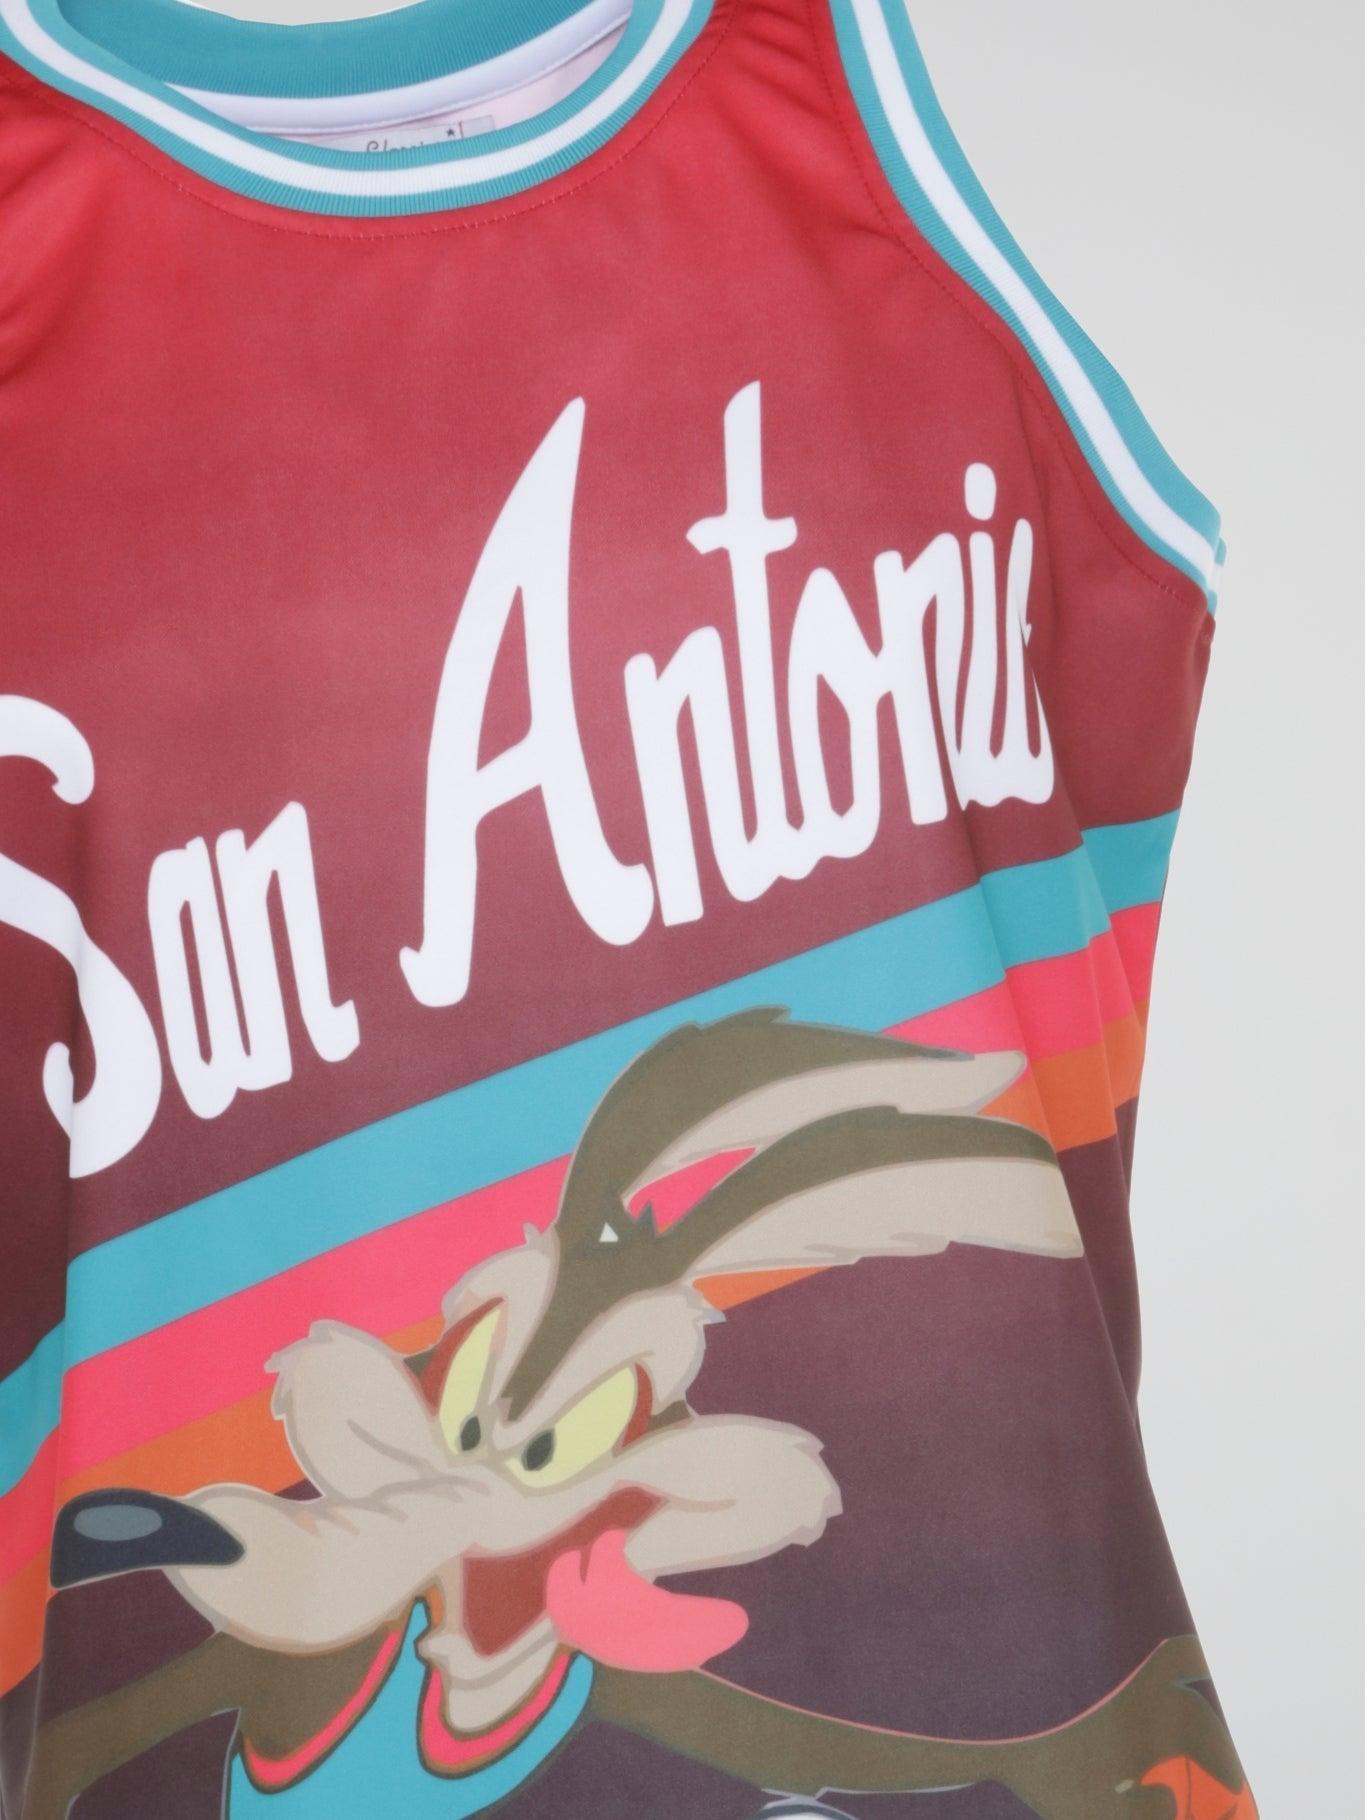 Wile E Coyote Alt Basketball Jersey - B-Hype Society